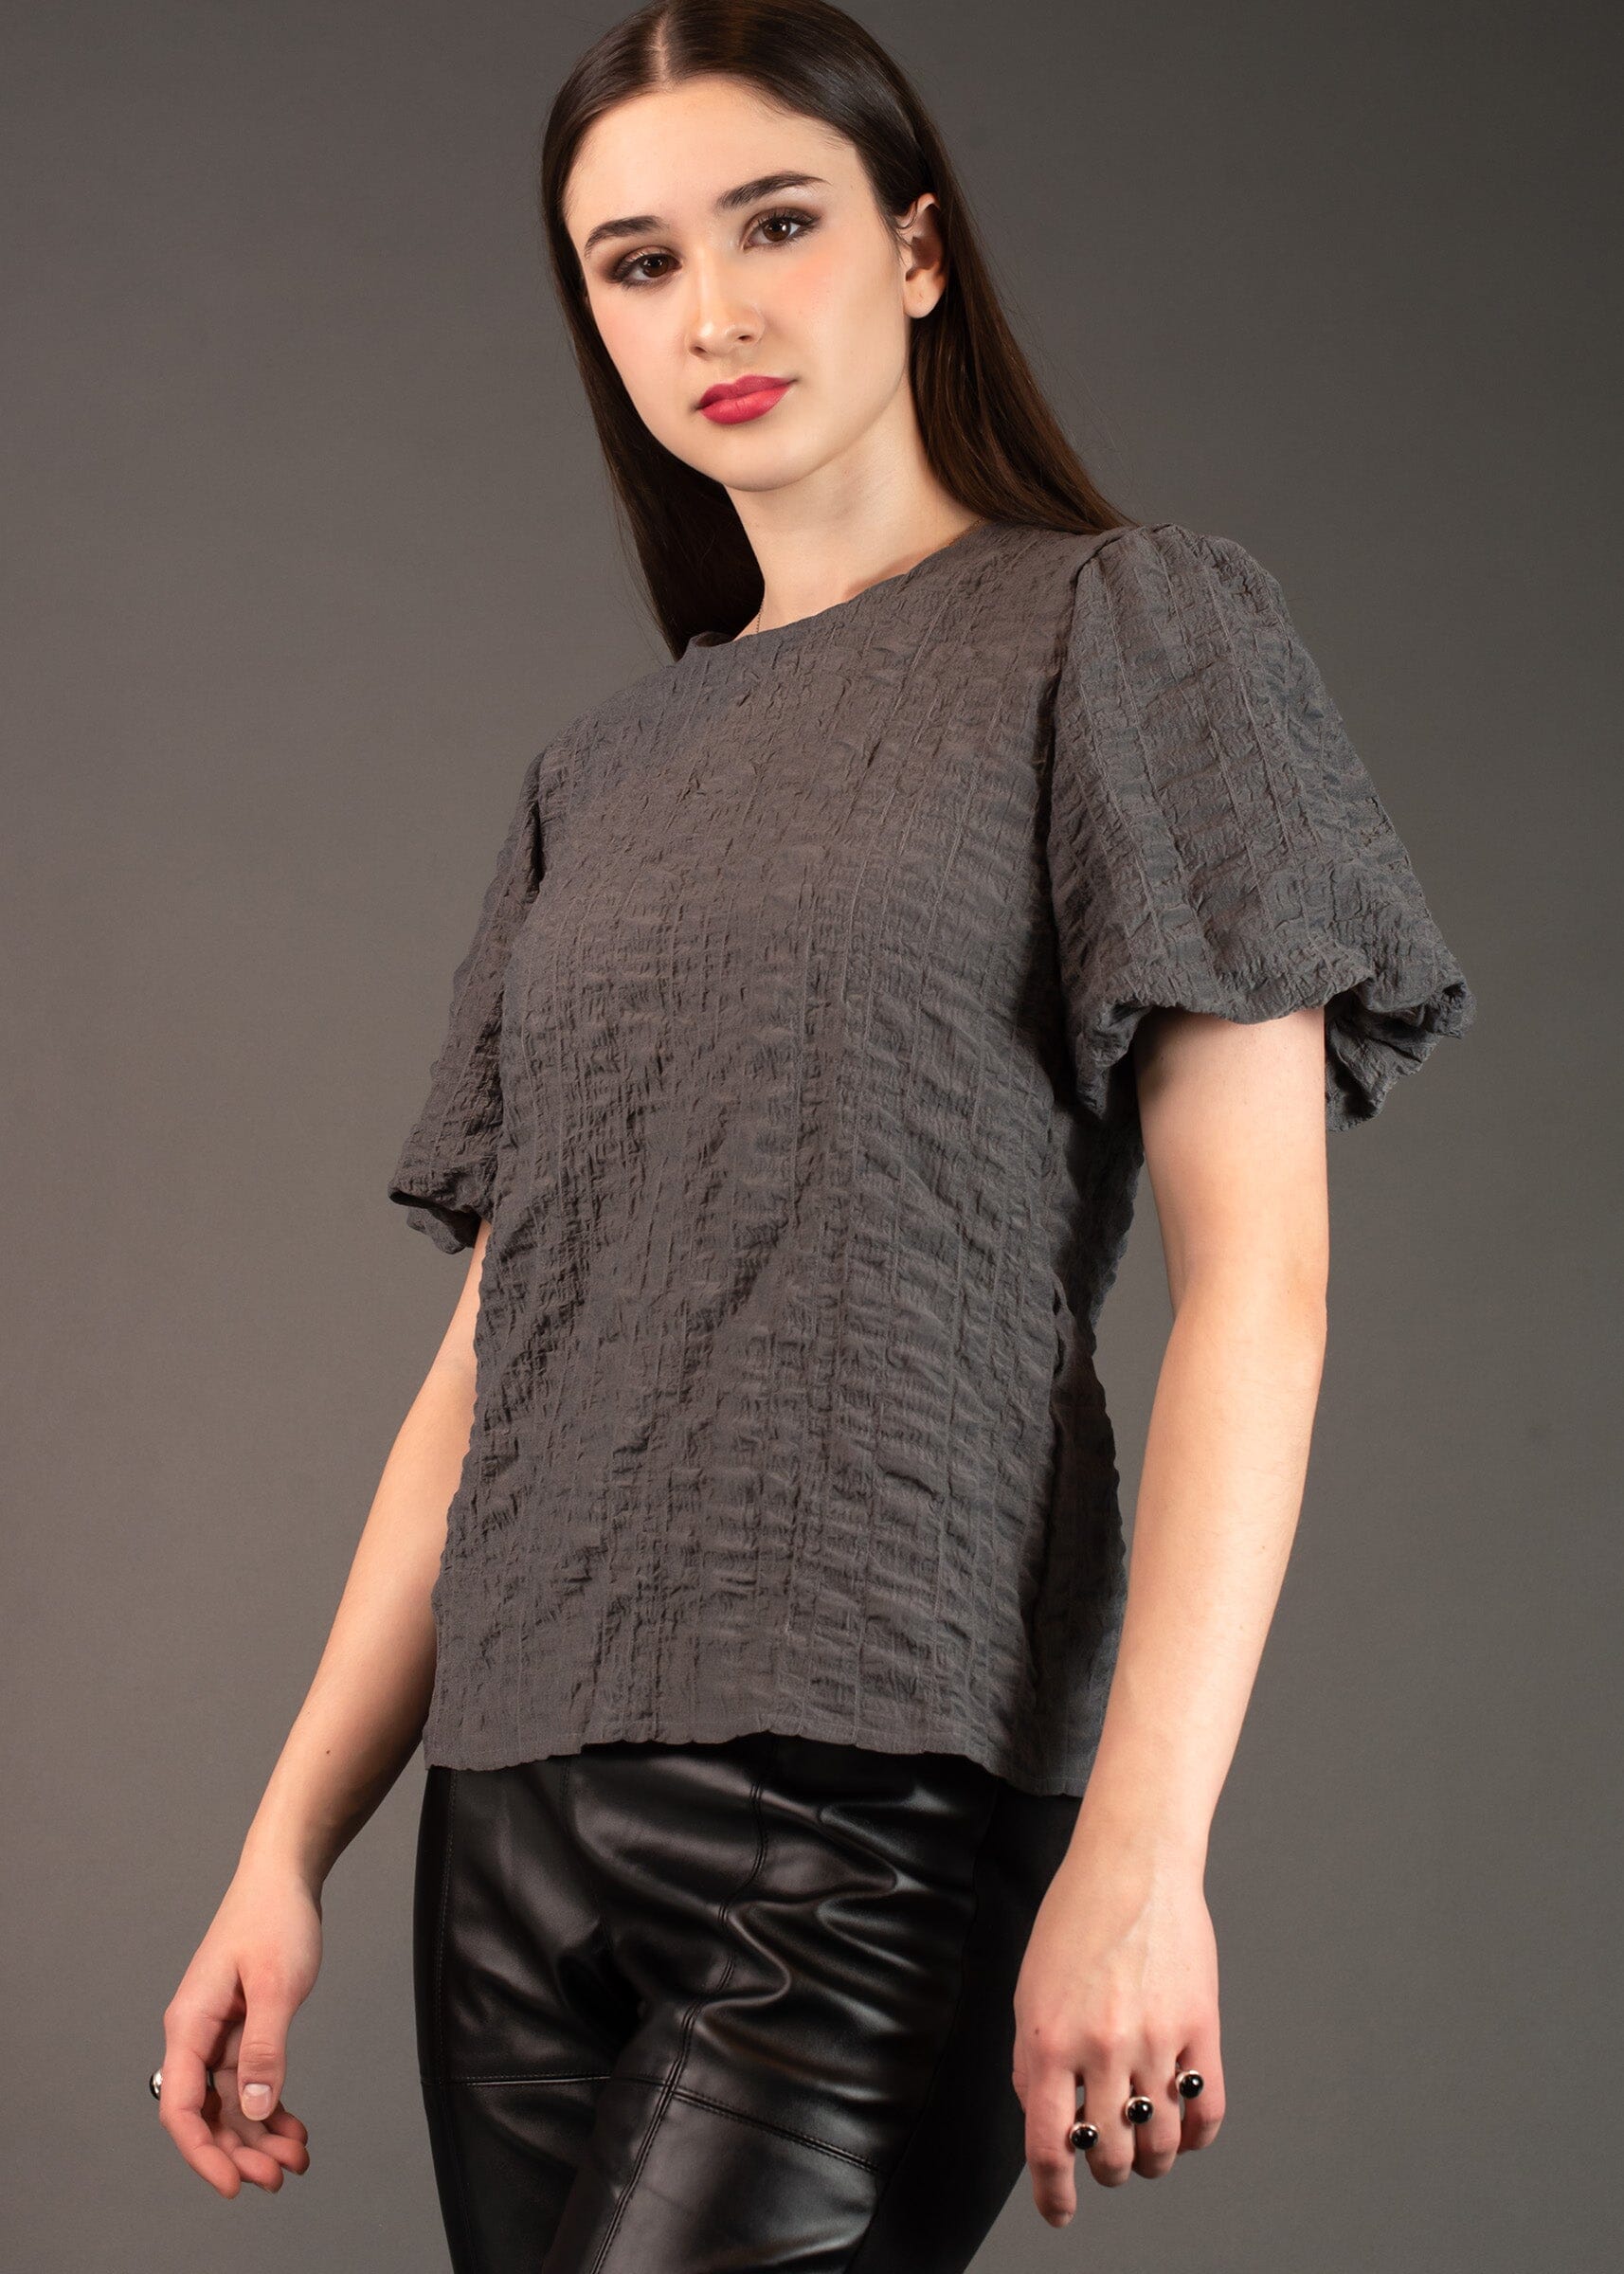 Puff Sleeve Textured Top Blouses Kate Hewko 